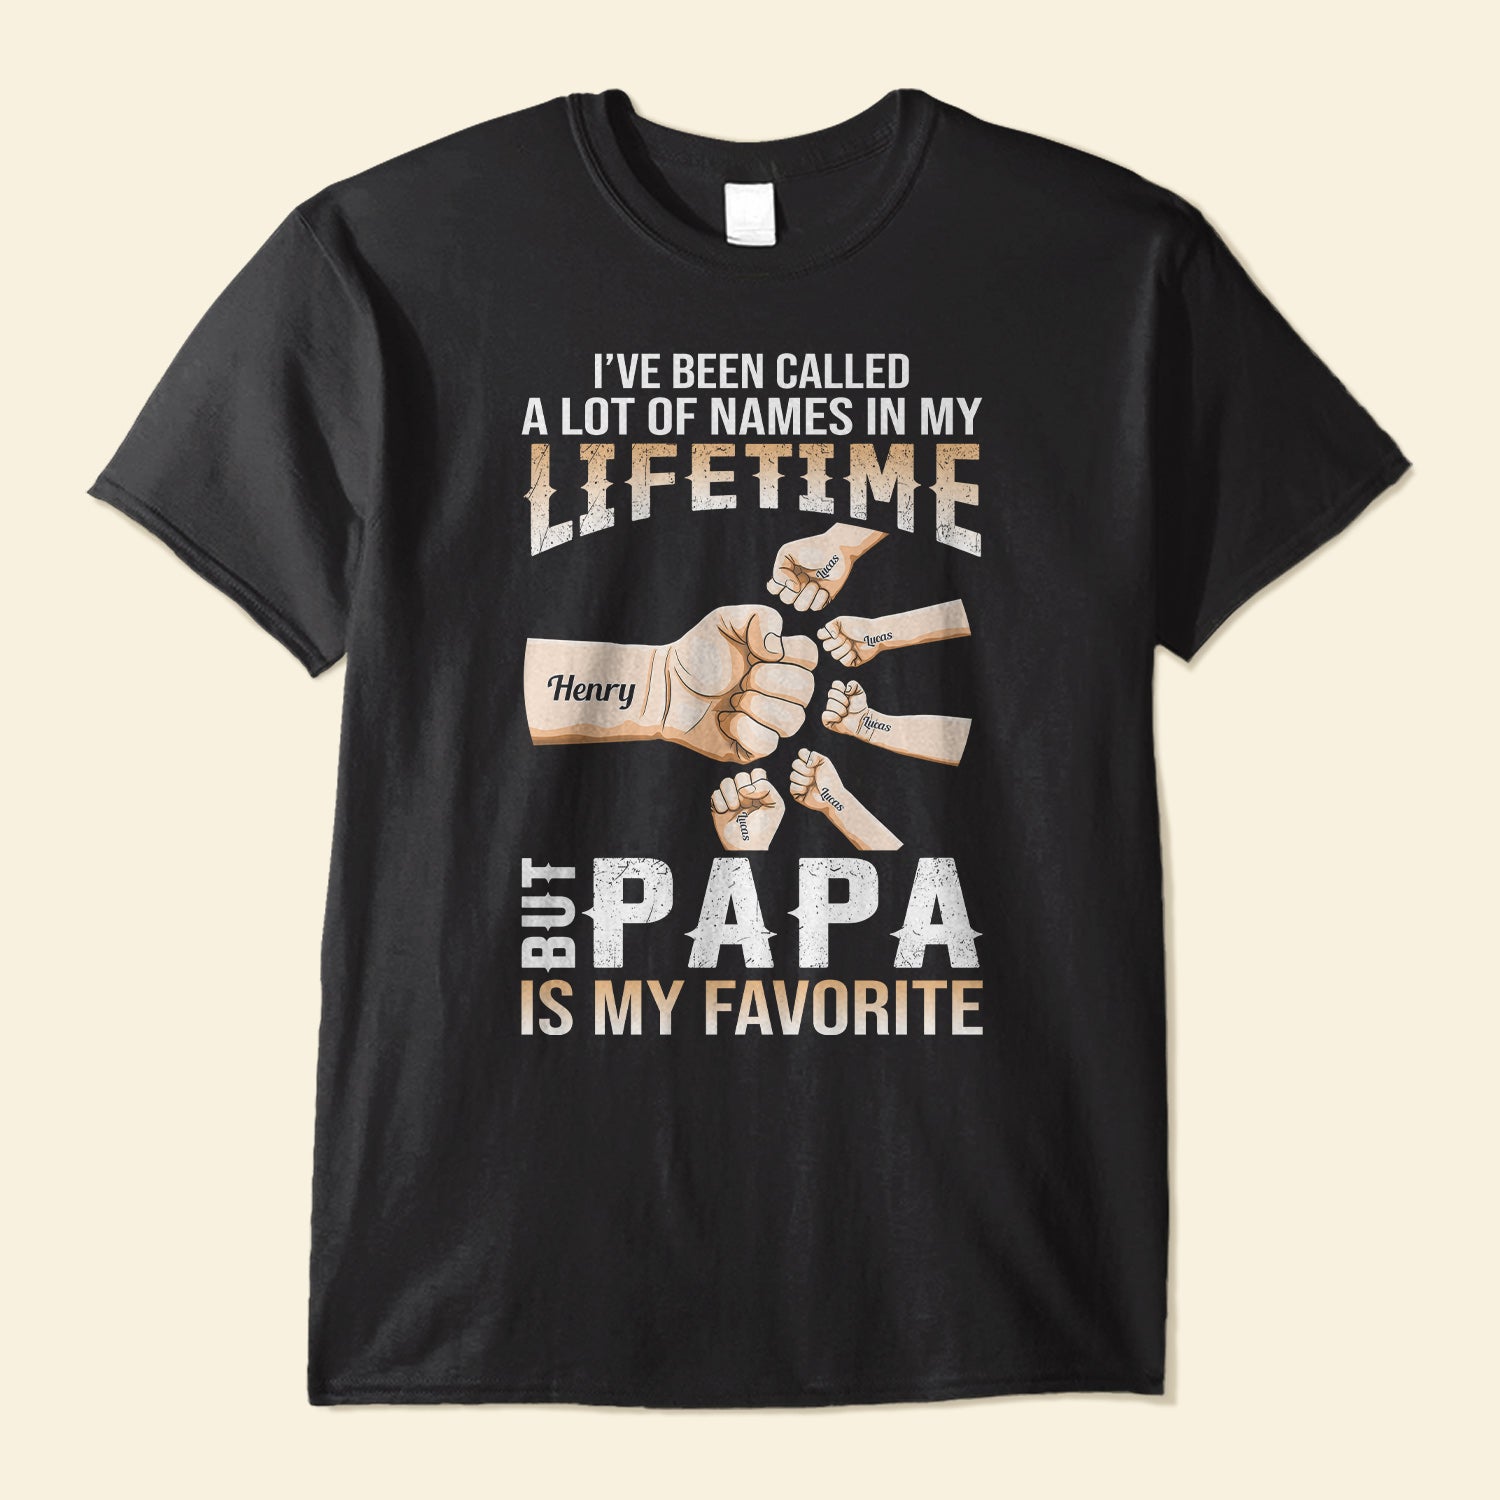 I've Been Called A Lot Of Names In My Lifetime - Personalized Shirt - Birthday Father's Day Gift For Daddy, Husband - Gift From Wife, Daughters, Sons